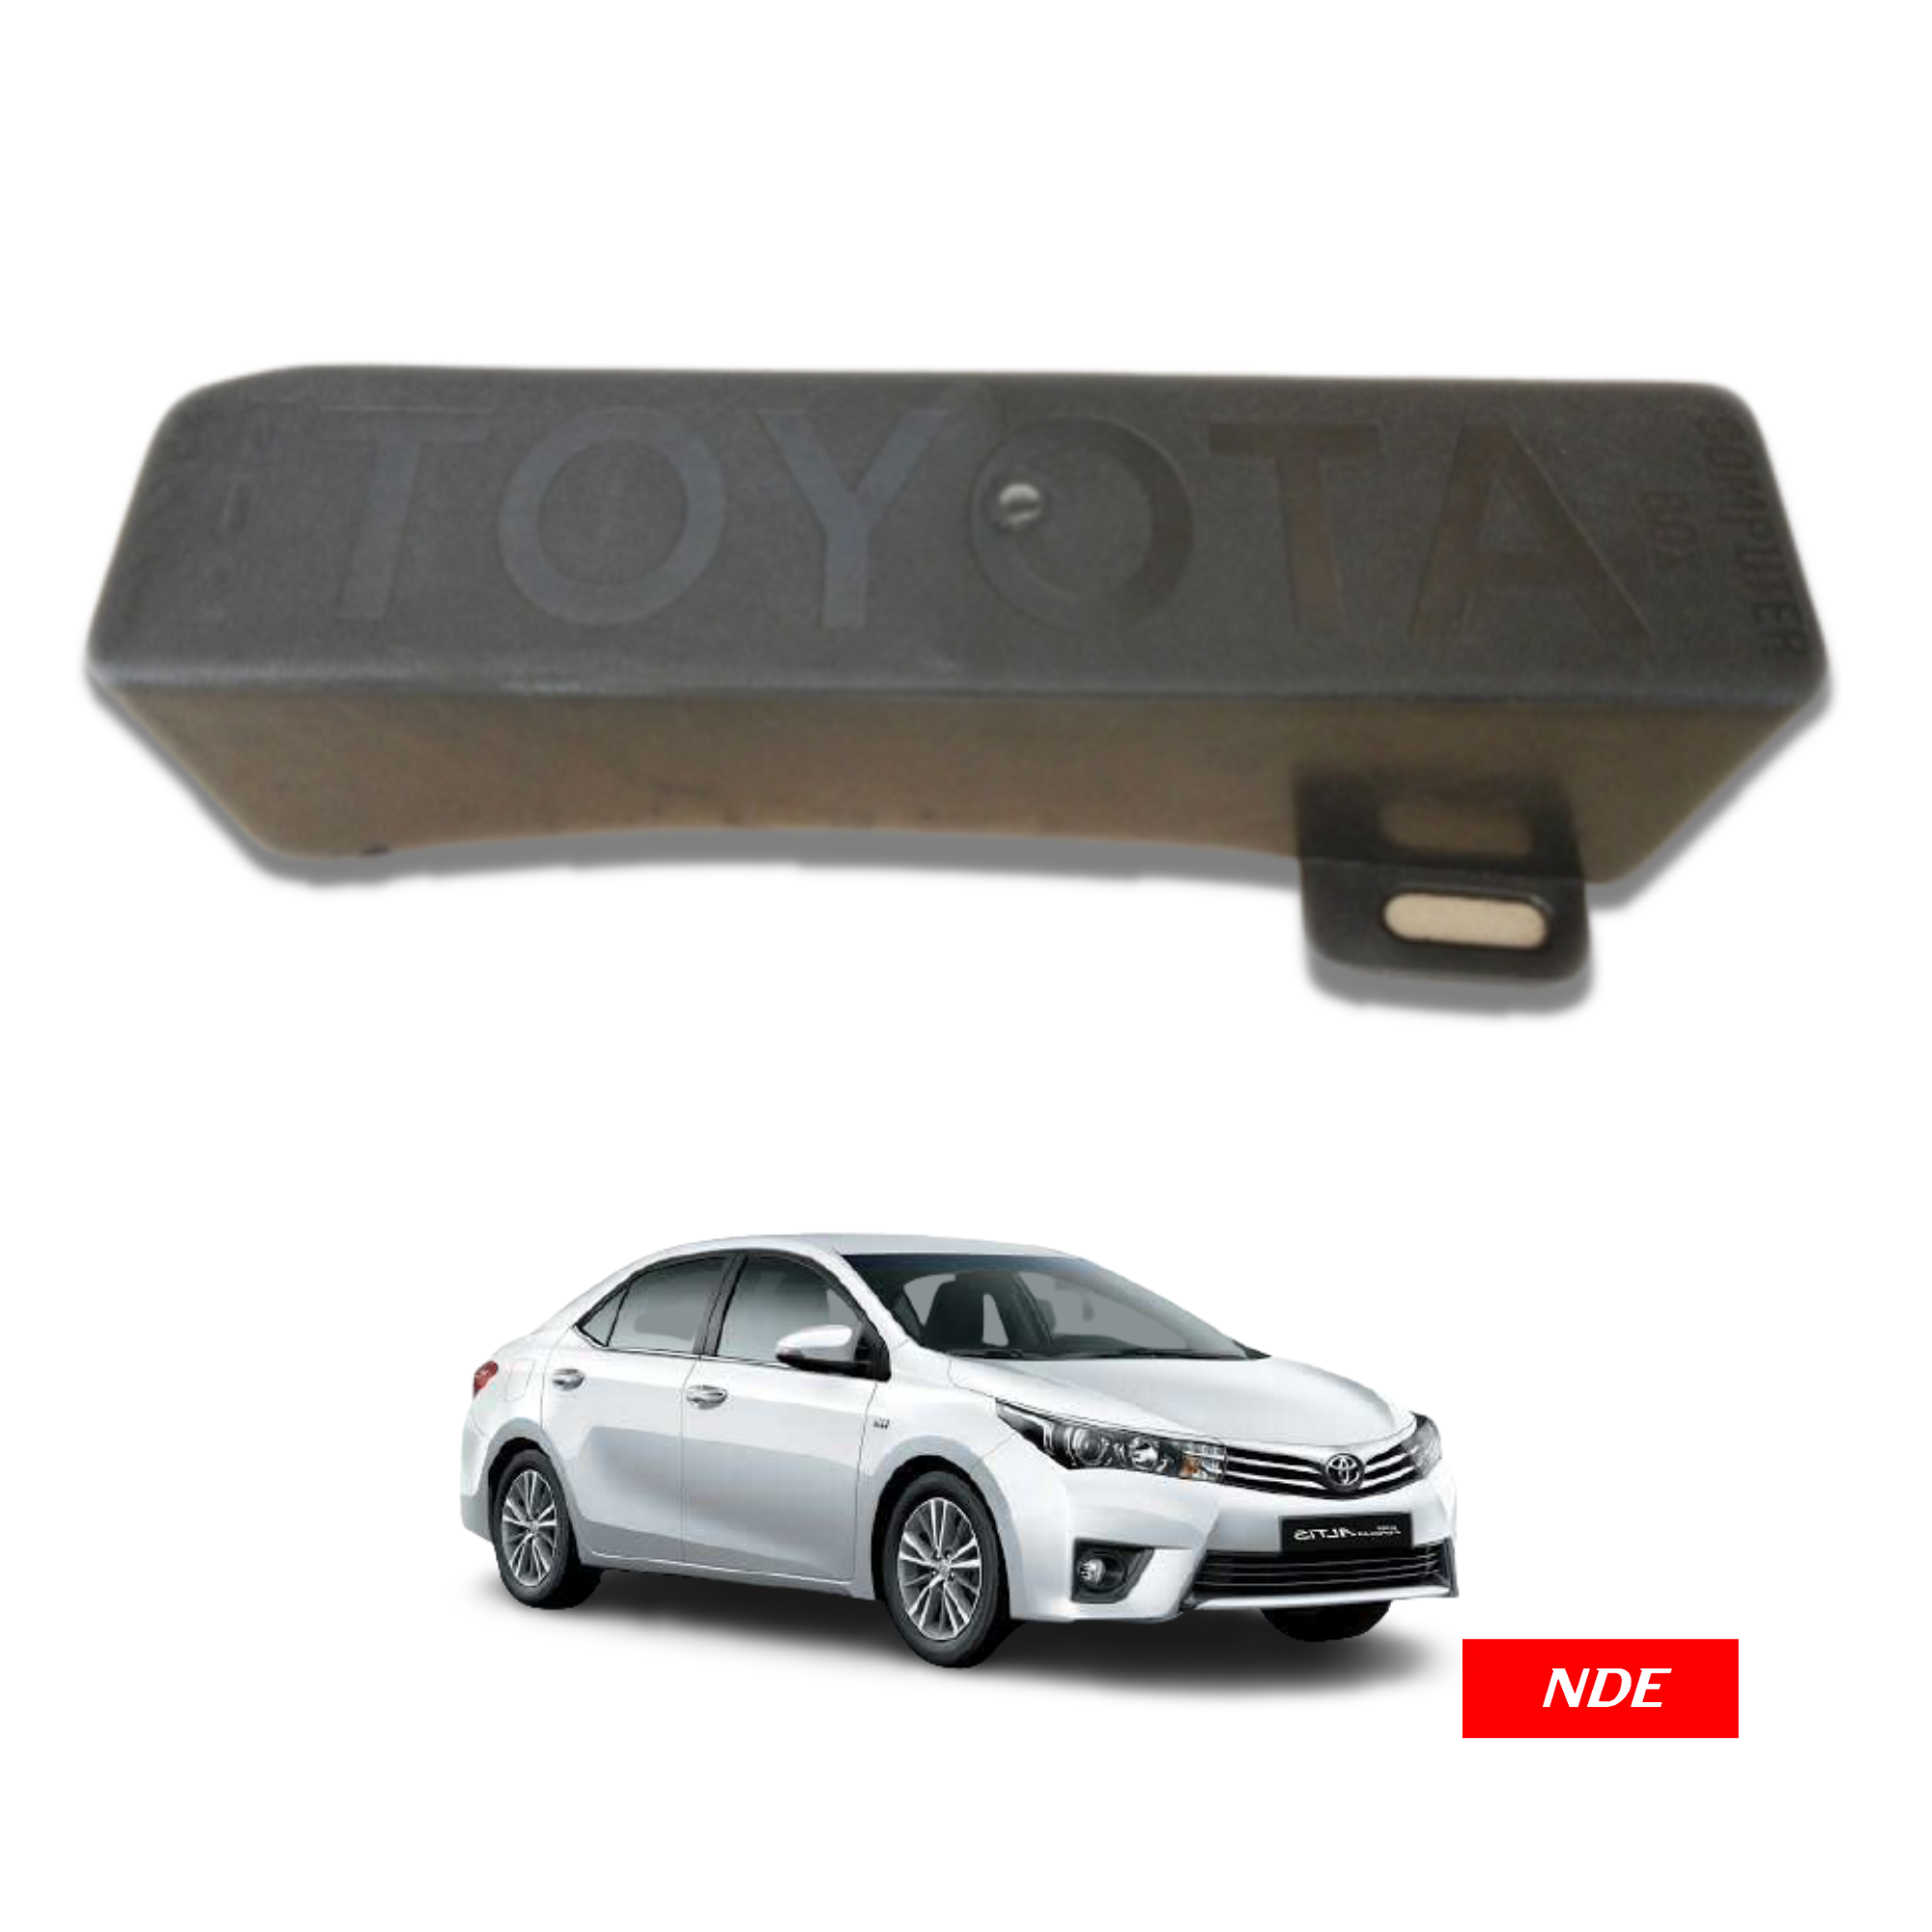 ESSENTIAL COVER FOR  ECU / COMPUTER COVER FOR TOYOTA COROLLA